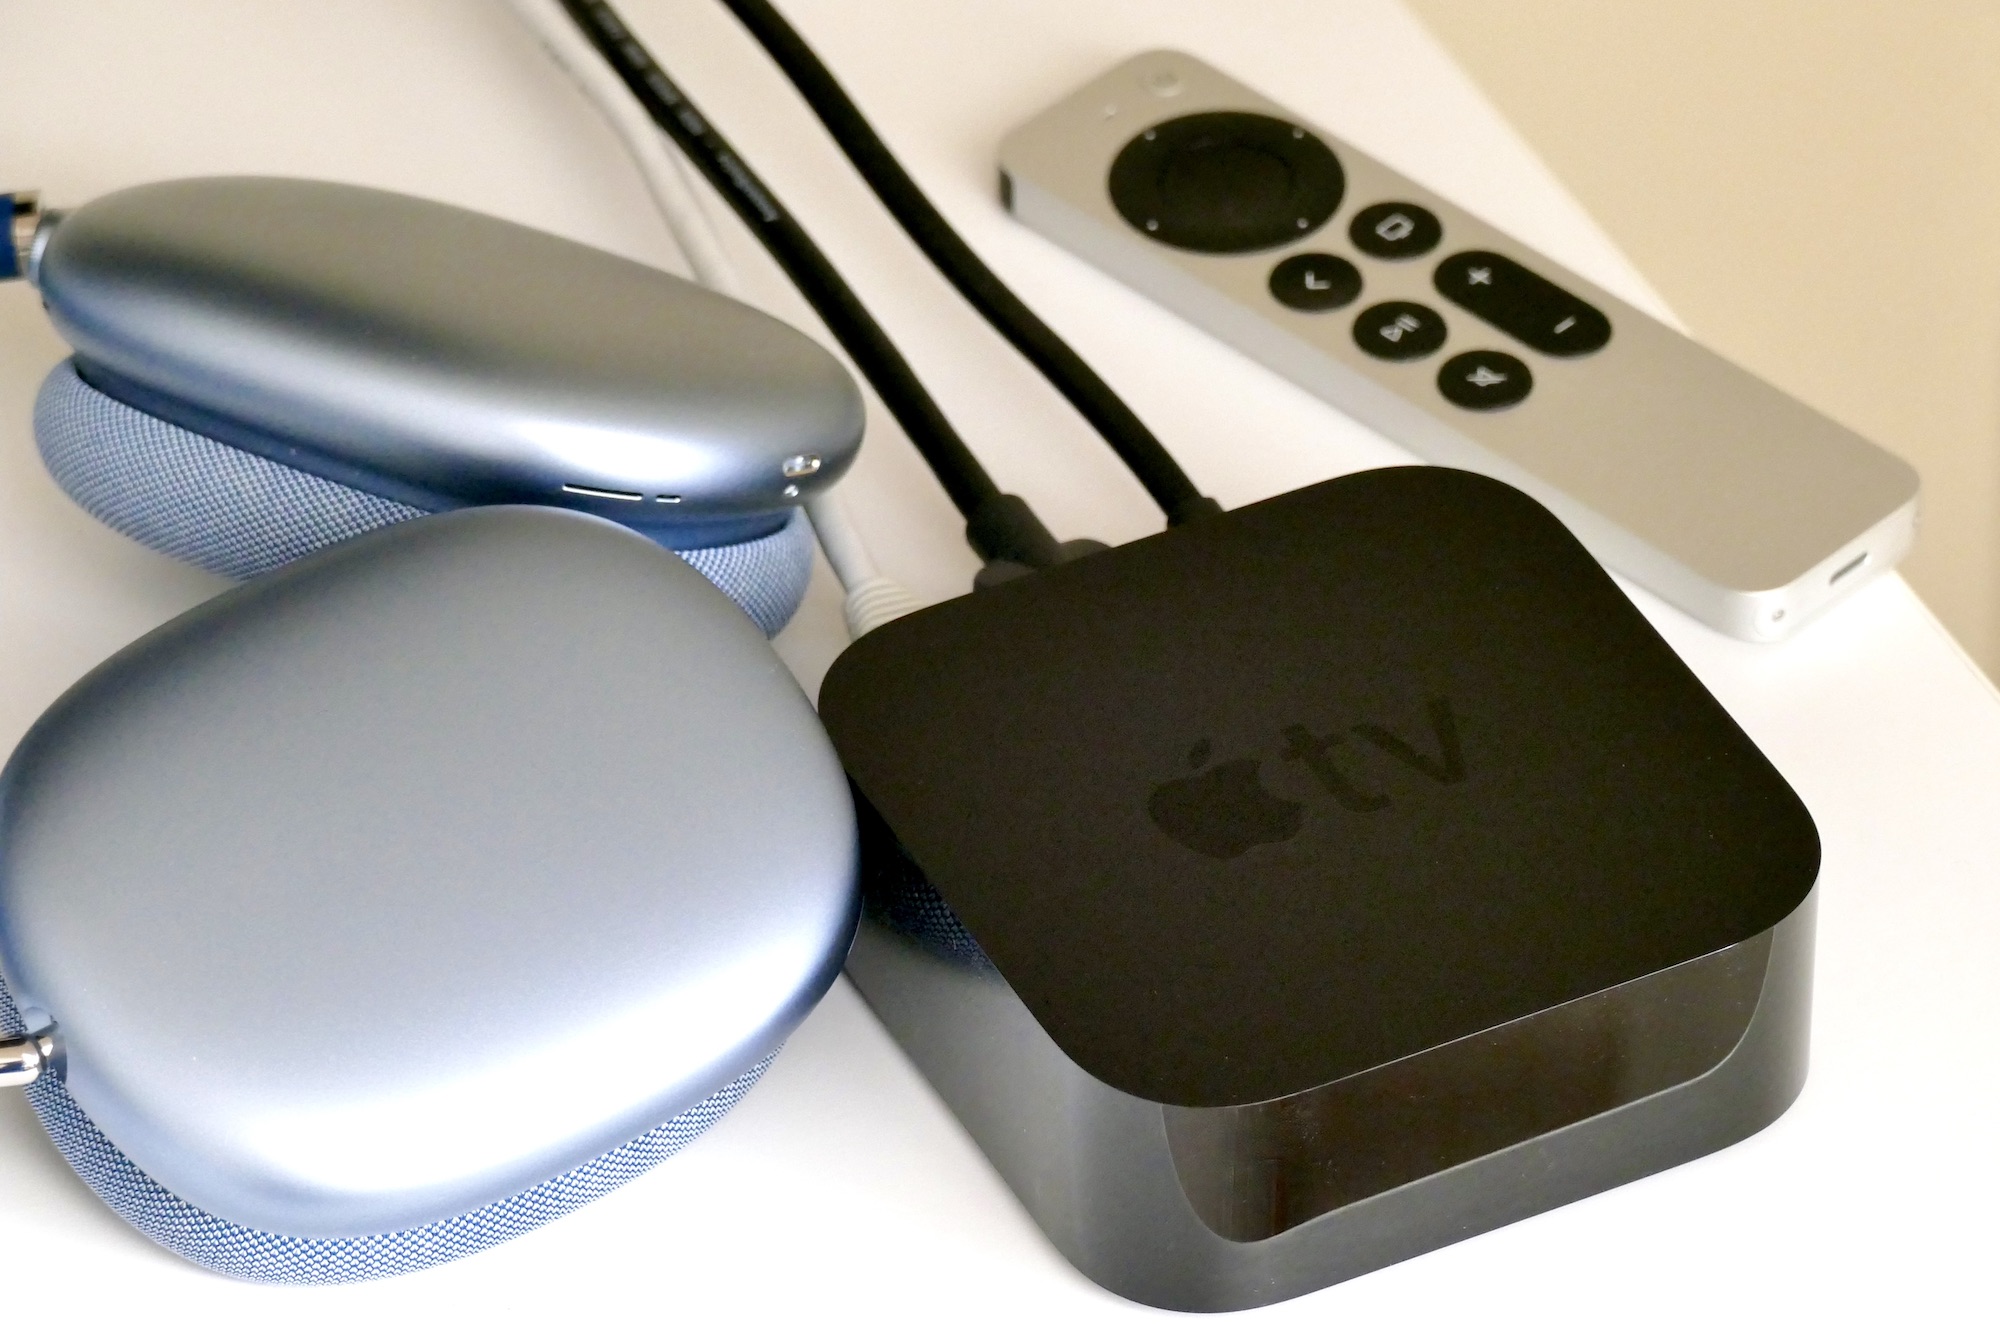 The AirPods Max and Apple TV 4K with remote on a table.